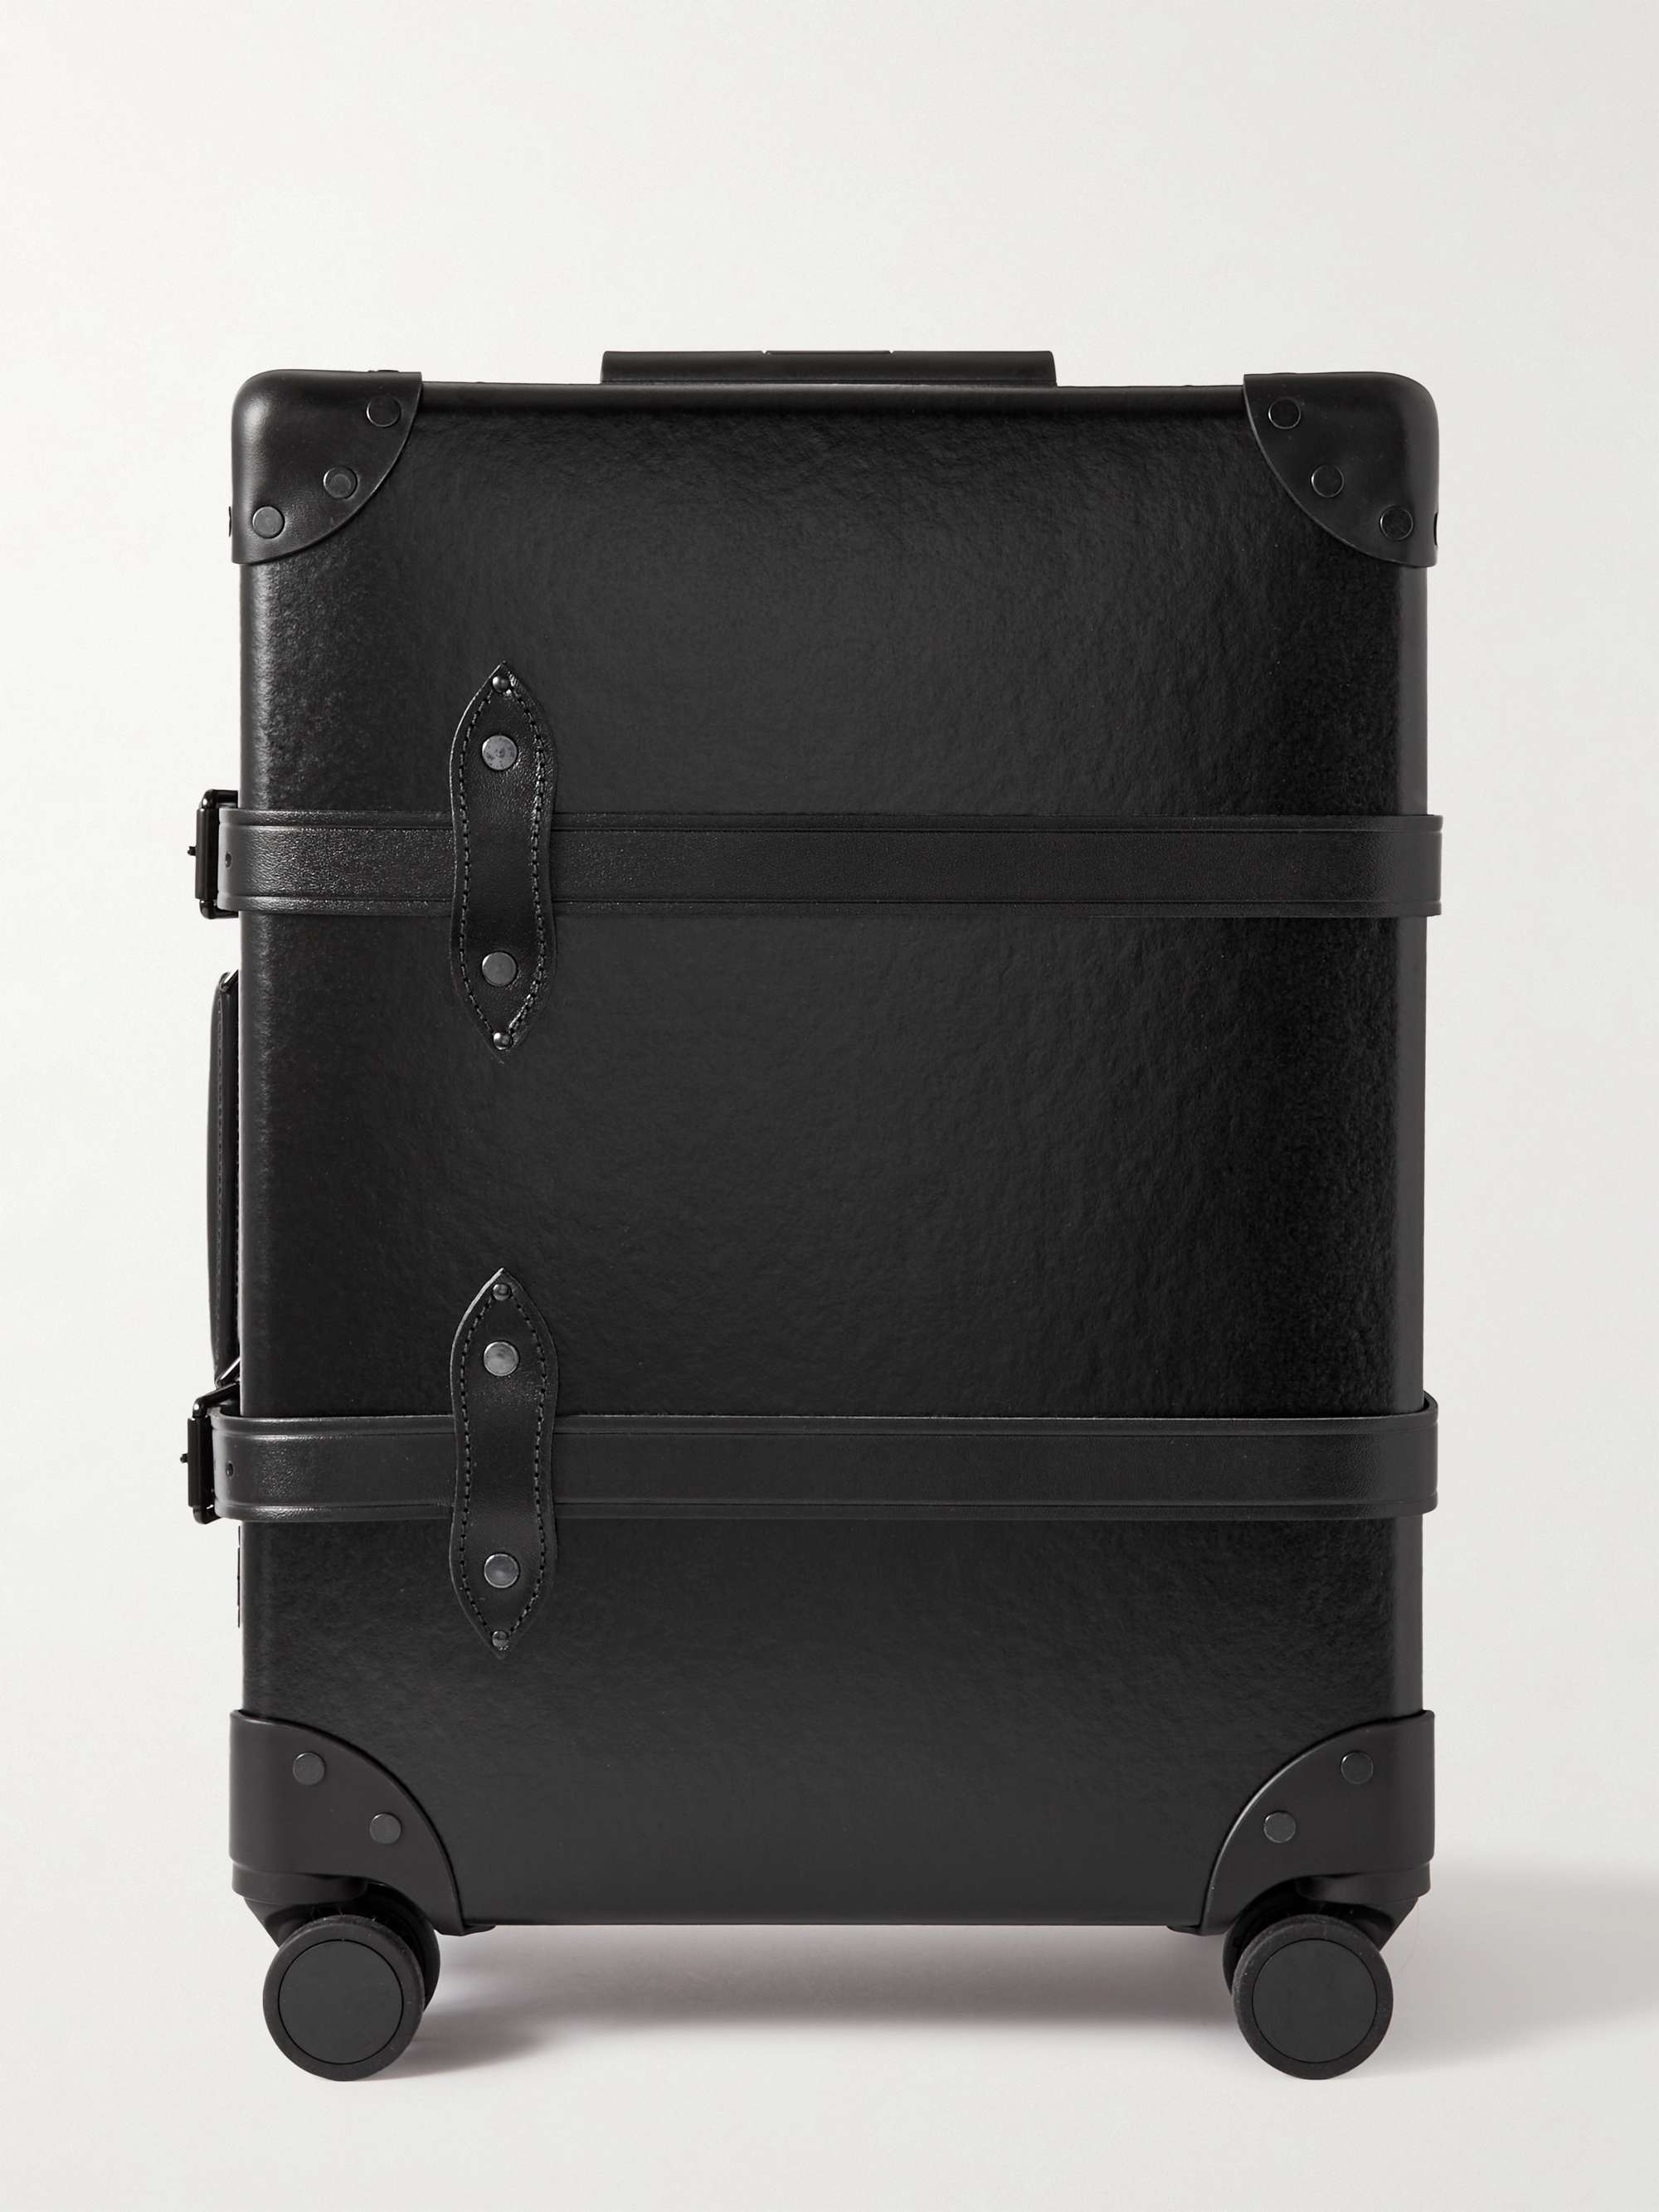 GLOBE-TROTTER Centenary Leather-Trimmed Carry-On Suitcase